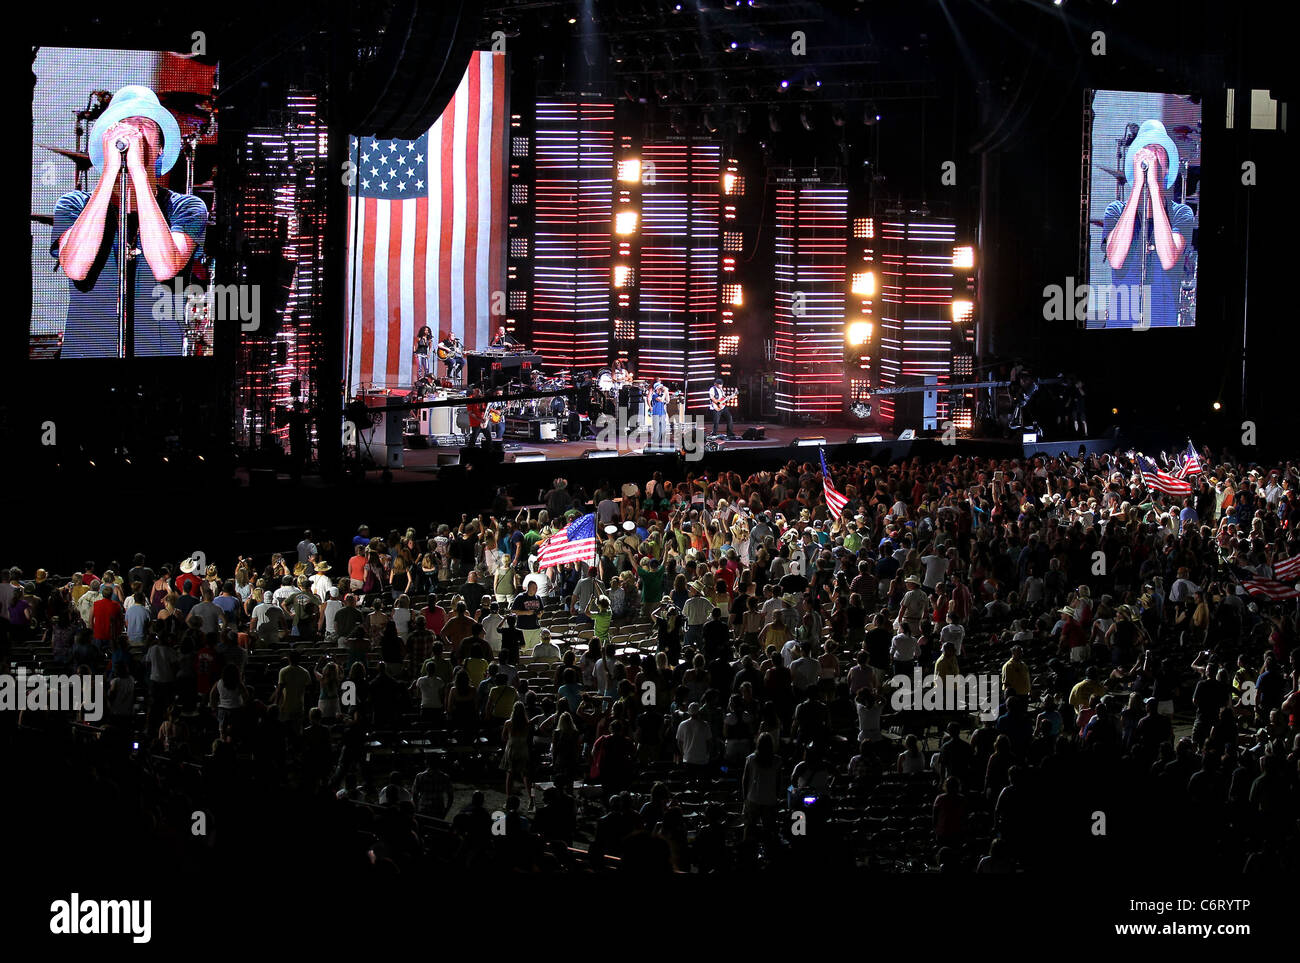 Atmosphere 2010 CMA Music Festival Nightly Concerts at LP Field - Day 2 Nashville, Tennessee - 11.06.10 Stock Photo